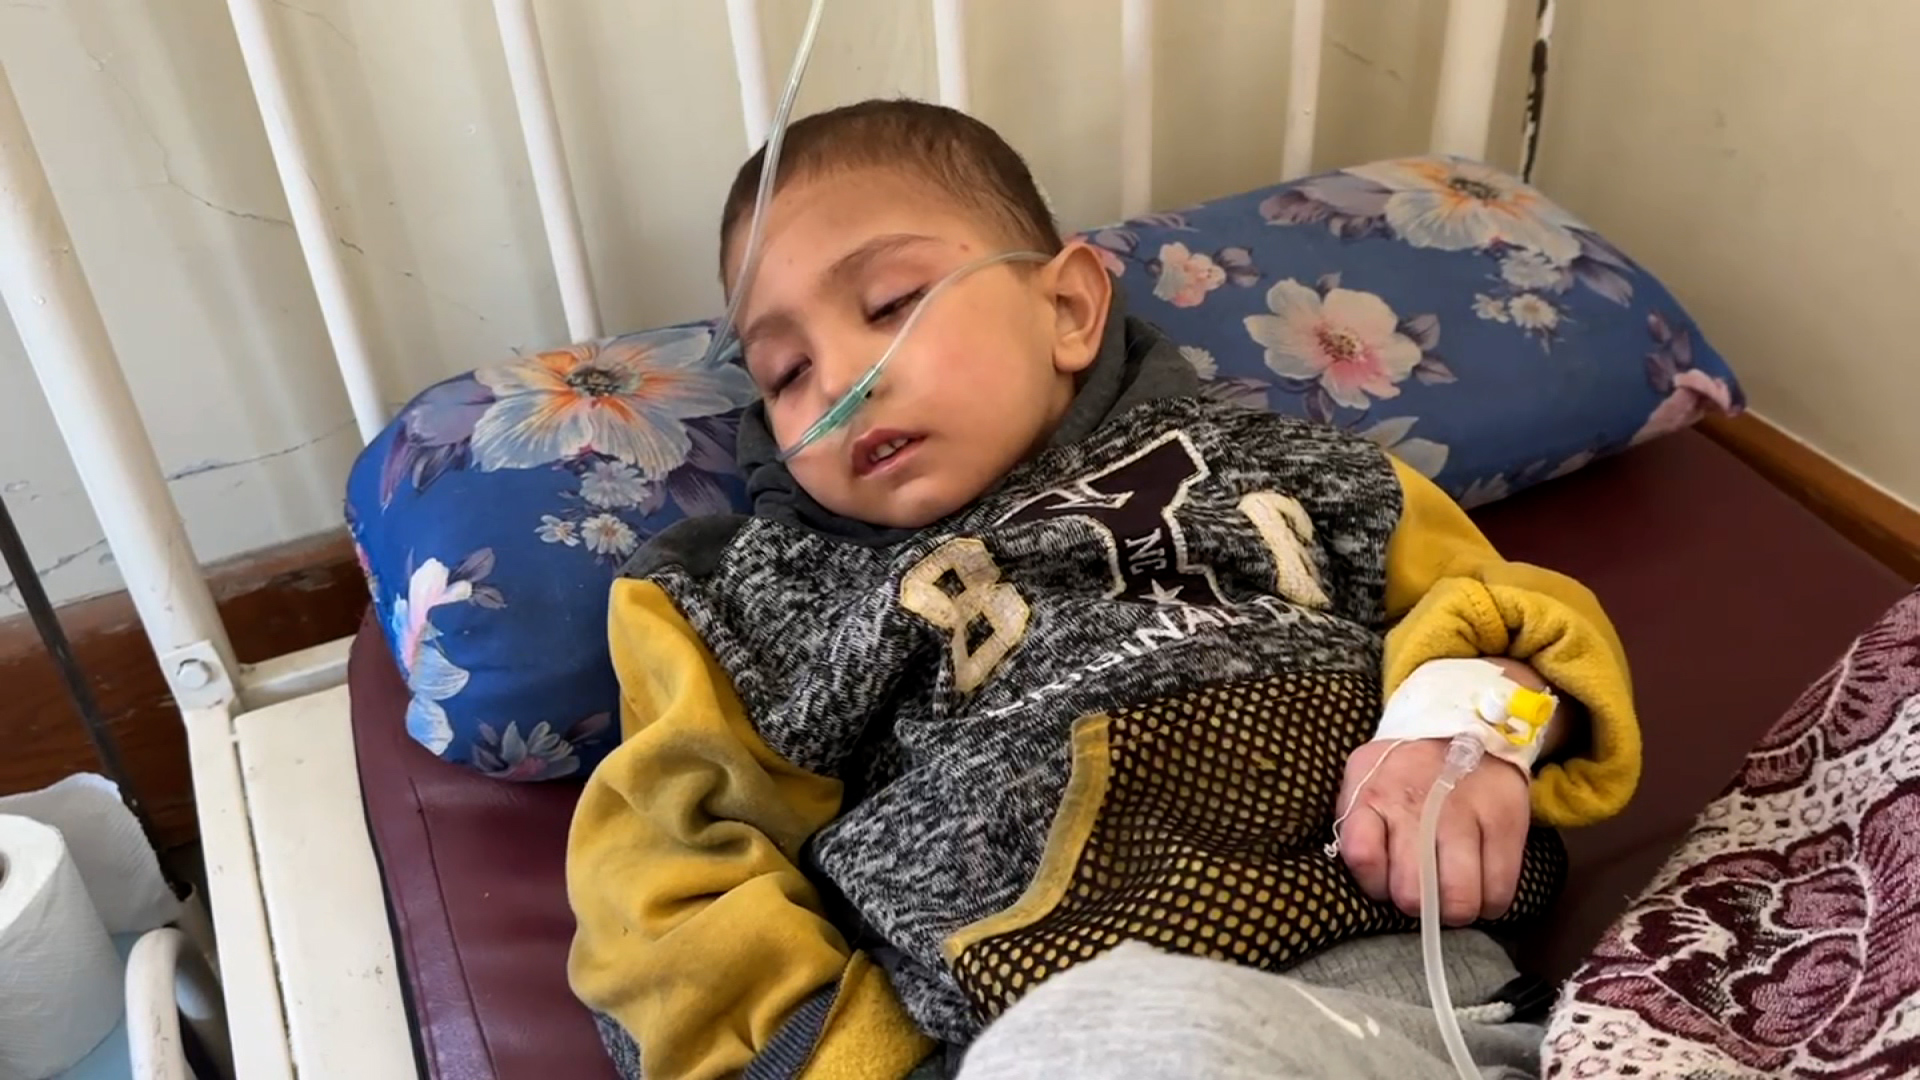 Mohammad Al-Najjar is seen at Kamal Adwan hospital in Gaza earlier this month. He died of malnutrition on Thursday morning, according to Palestinian officials.